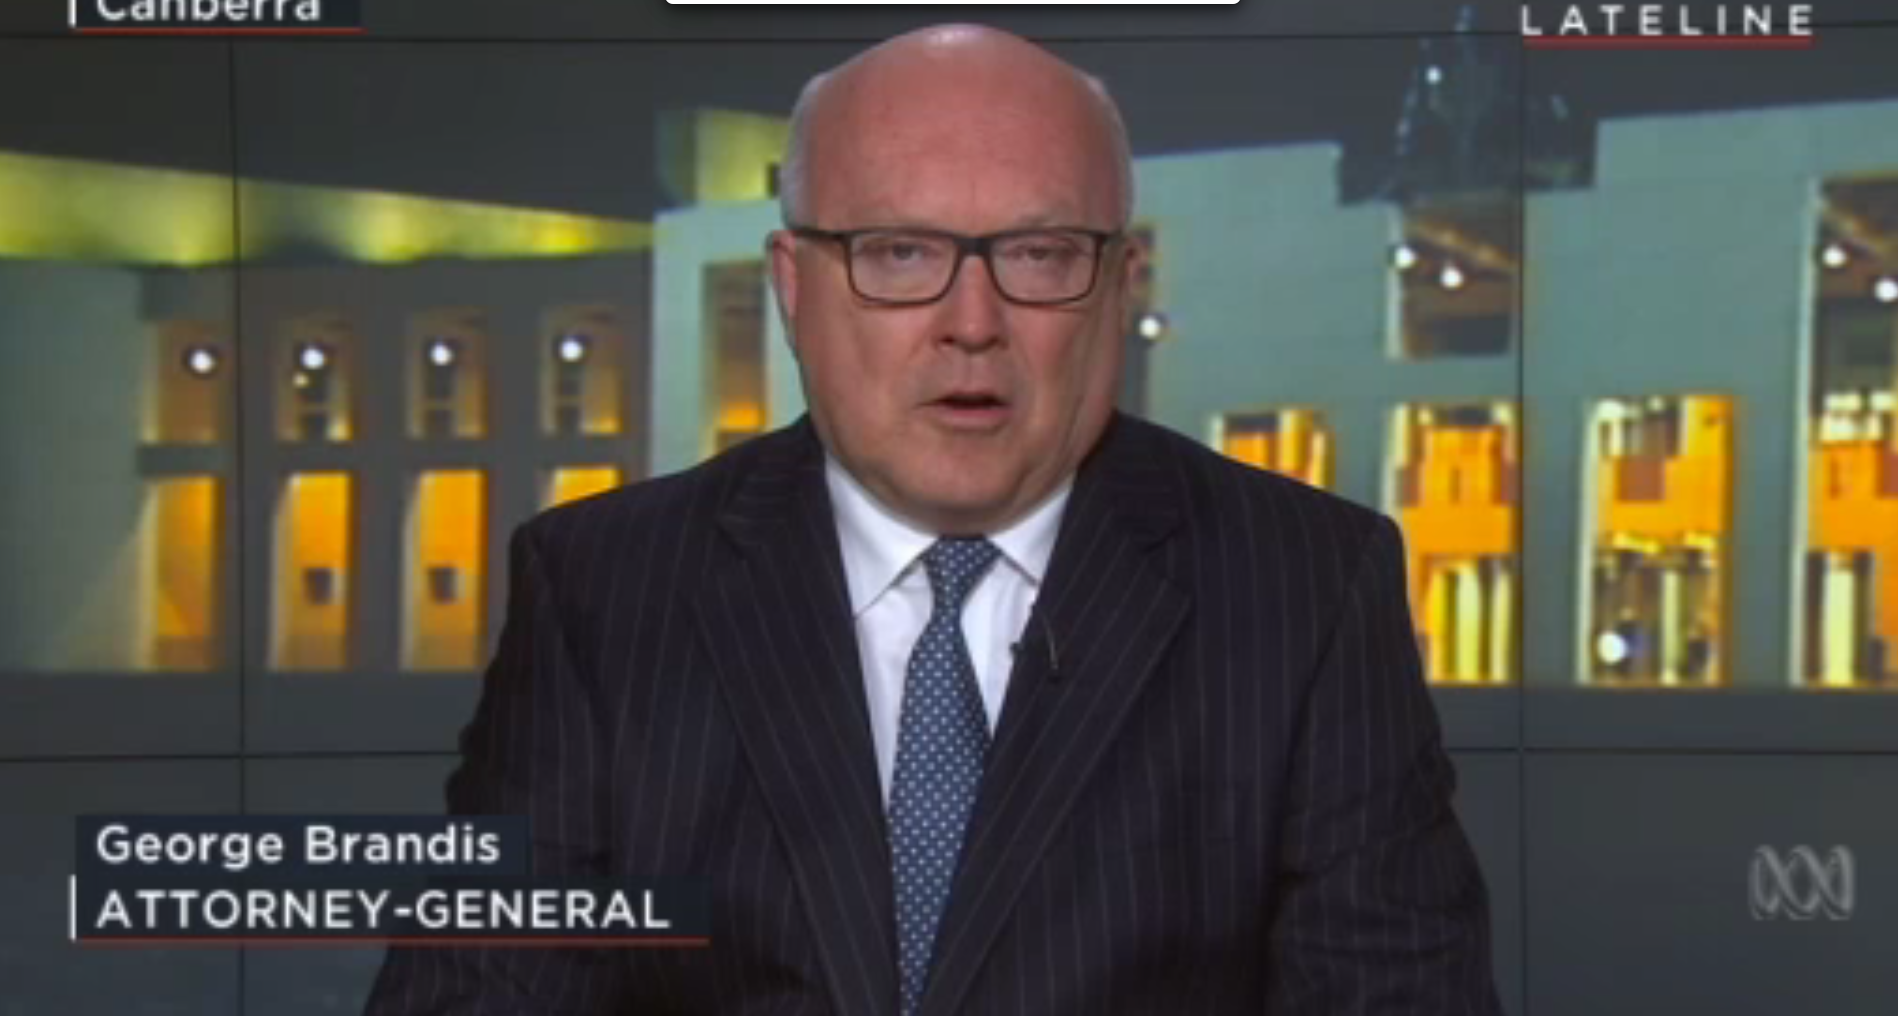 ‘The gay community is sick of being pawns in some political game’: Attorney-General George Brandis